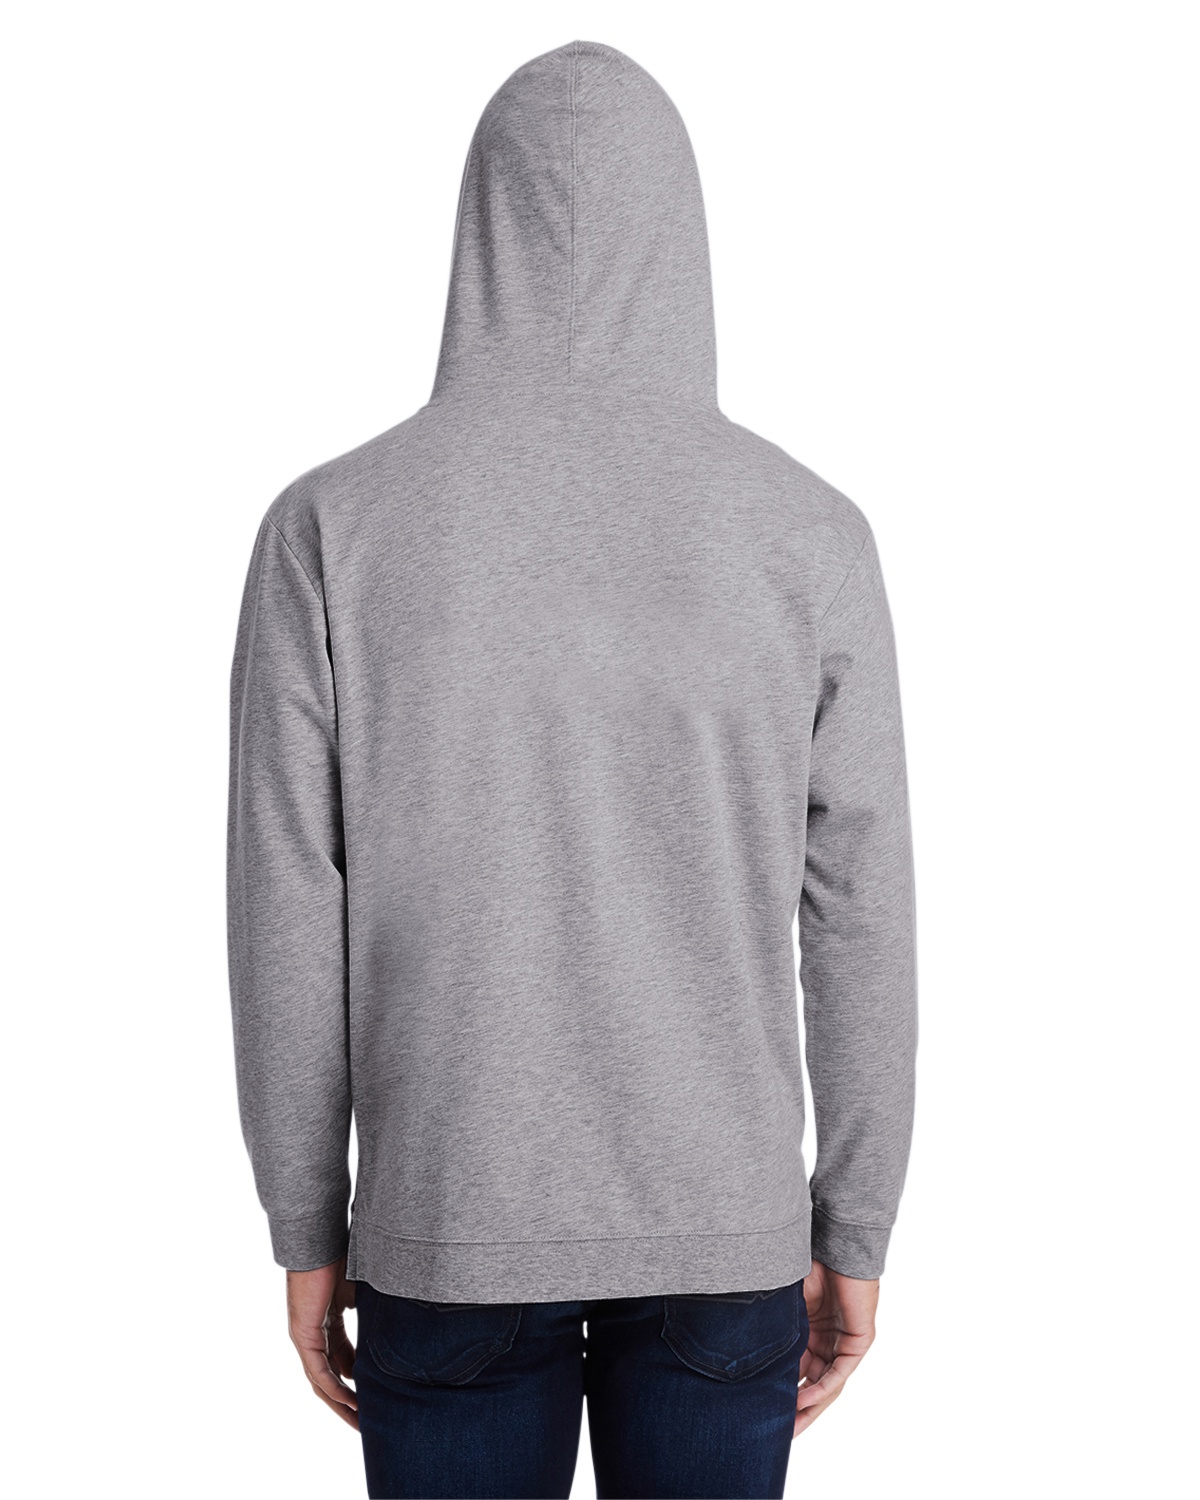 'Anvil 73500 French Terry Unisex Hooded Pullover'